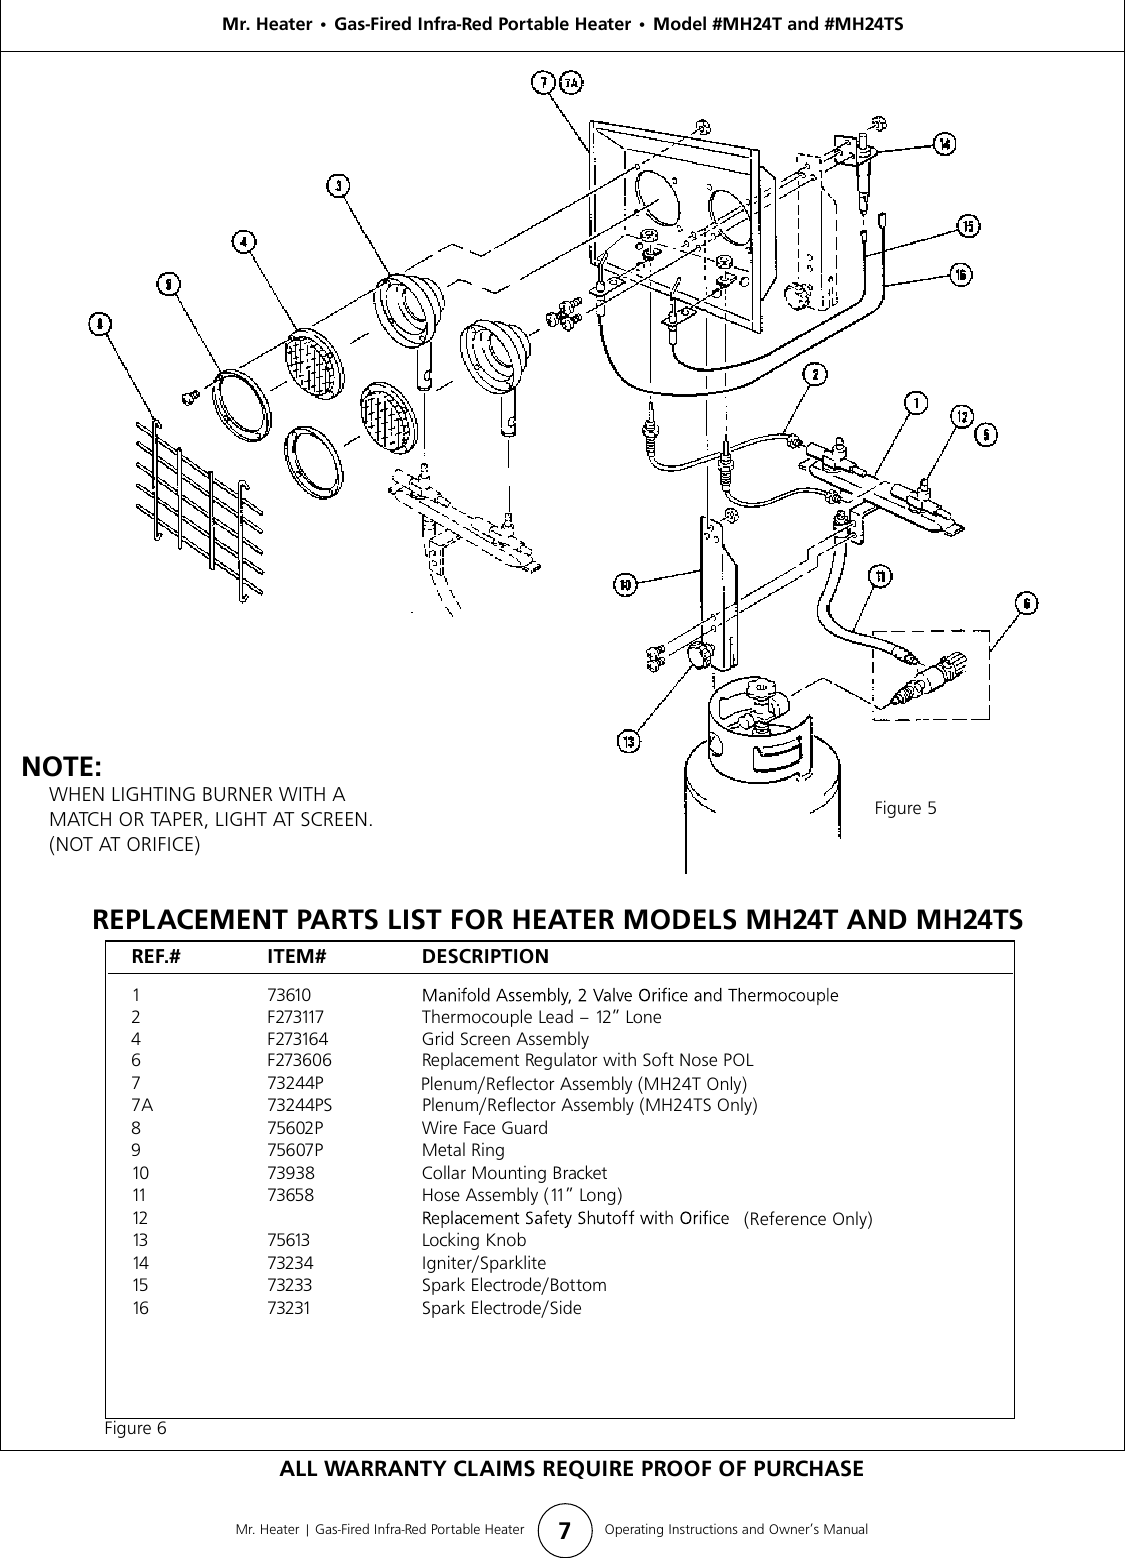 Page 7 of 8 - Mr-Heater Mr-Heater-Mh24T-Users-Manual- MH24T_US_mar_27  Mr-heater-mh24t-users-manual